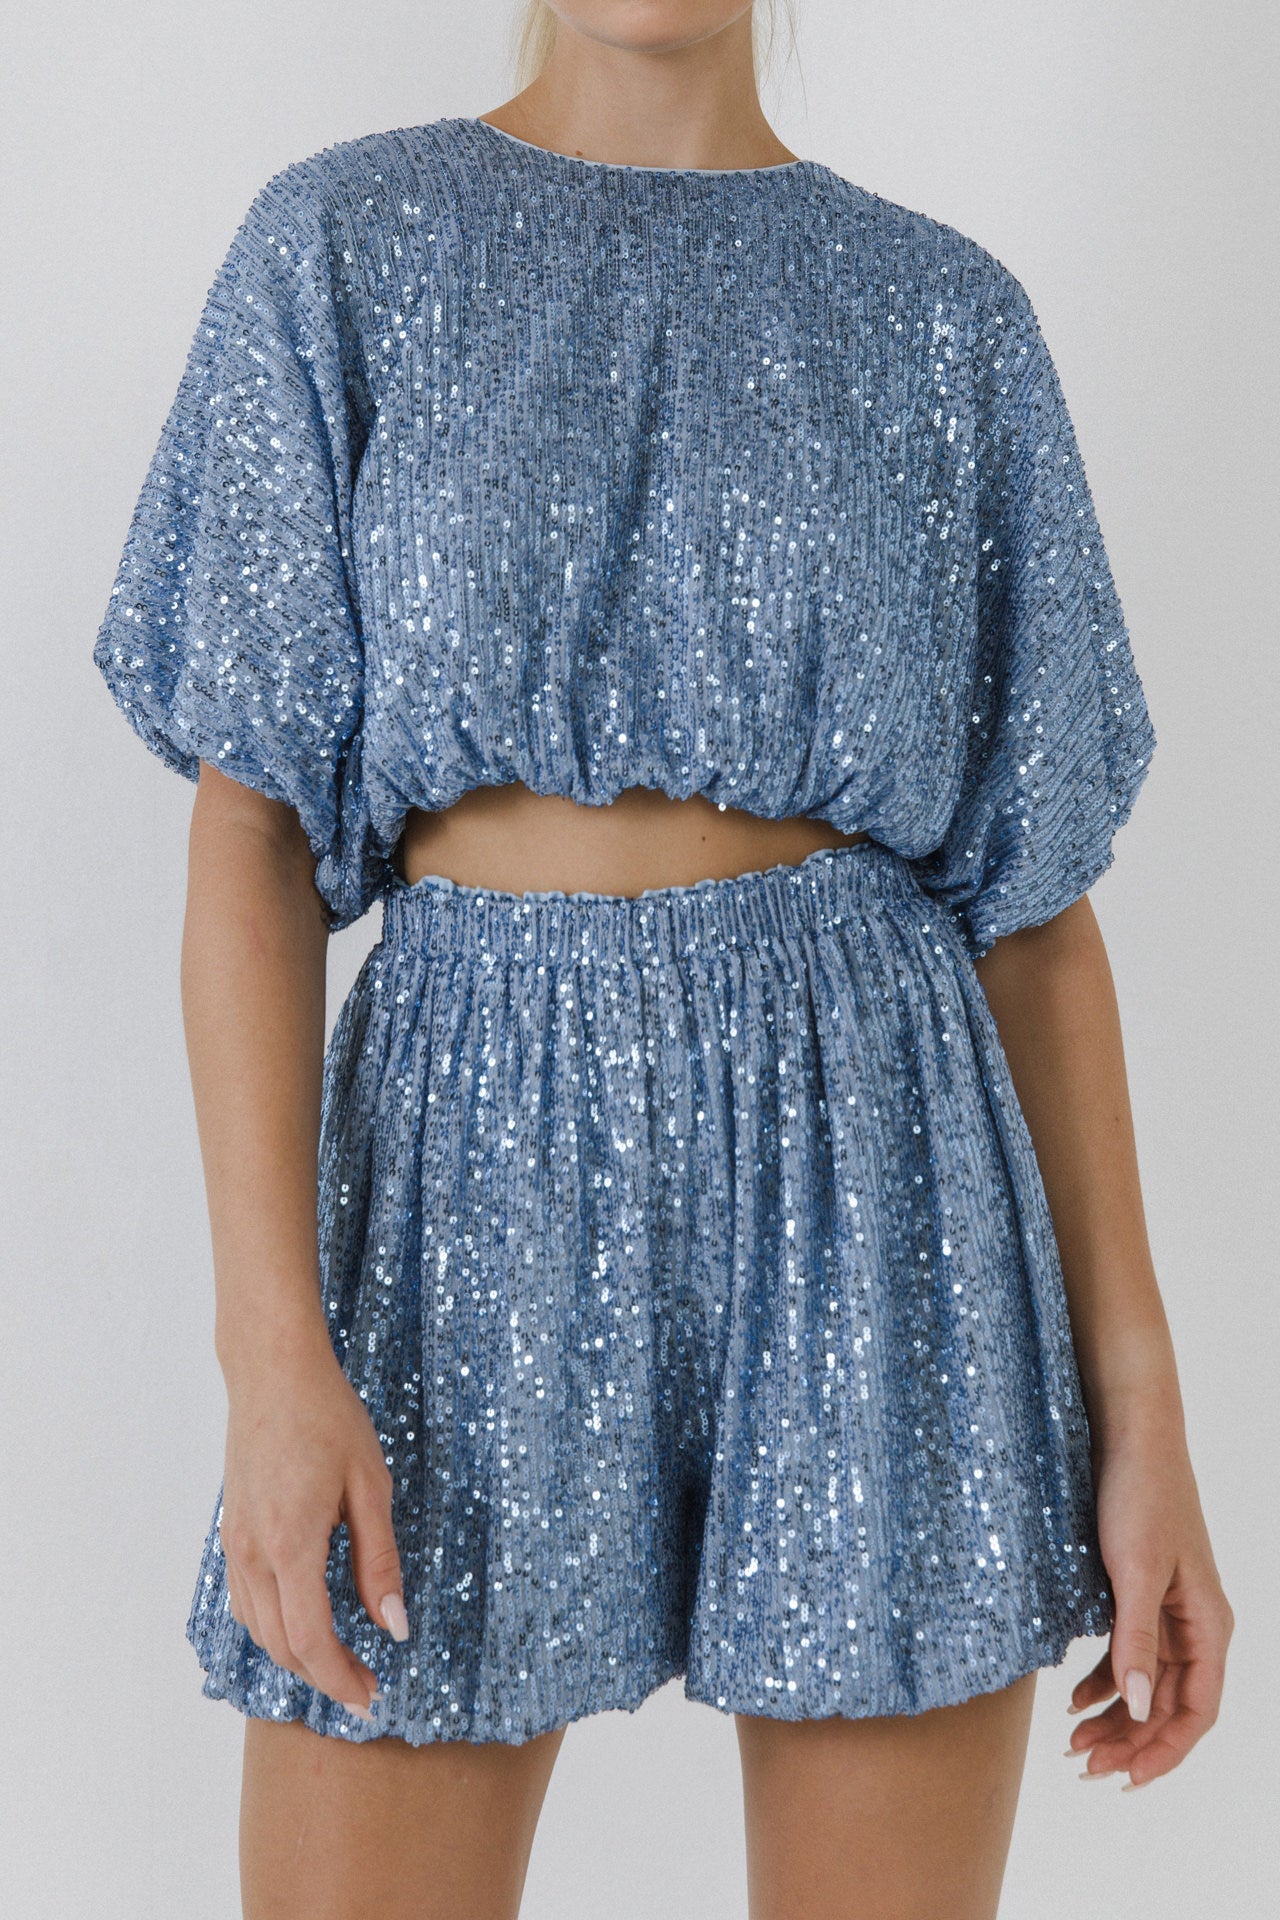 ENDLESS ROSE - Sequins Cropped Puff Top - TOPS available at Objectrare